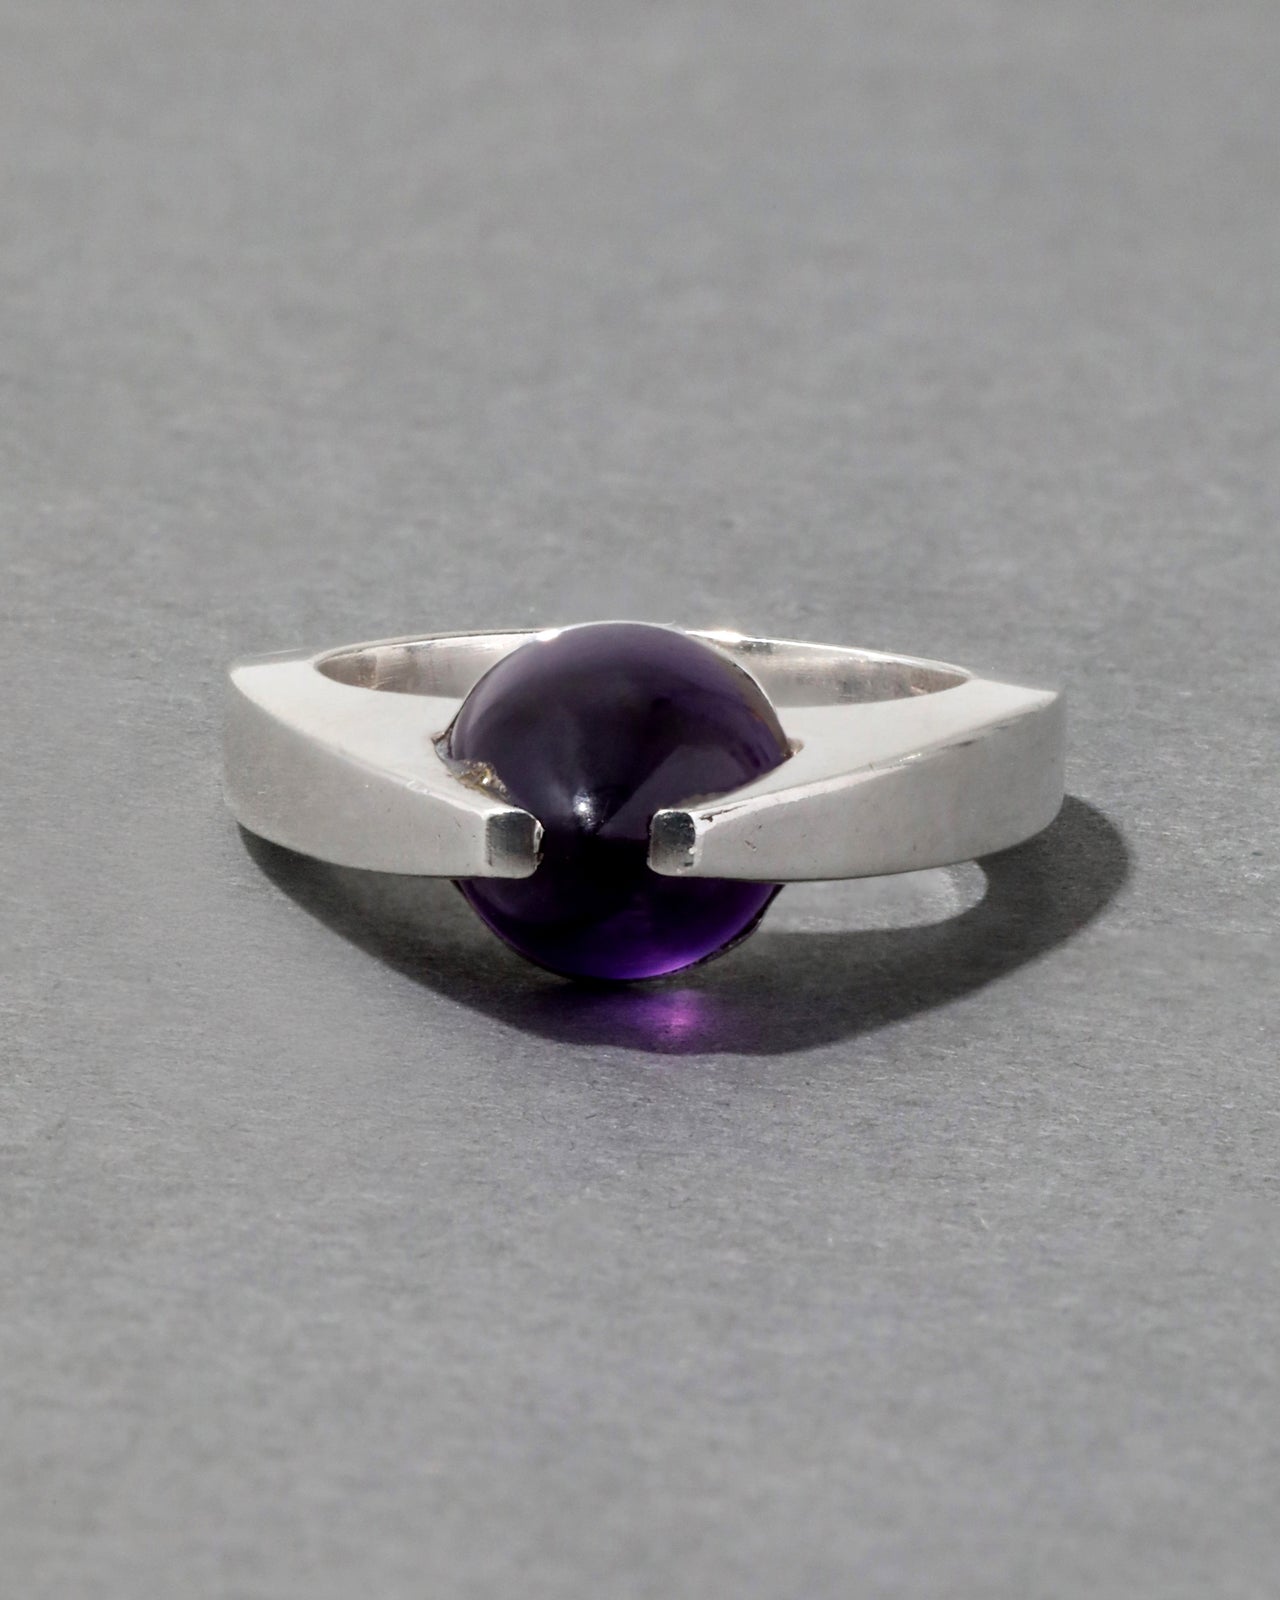 Vintage 1970s Arne Johnson Sterling Silver and Amethyst Ring - Photo 2